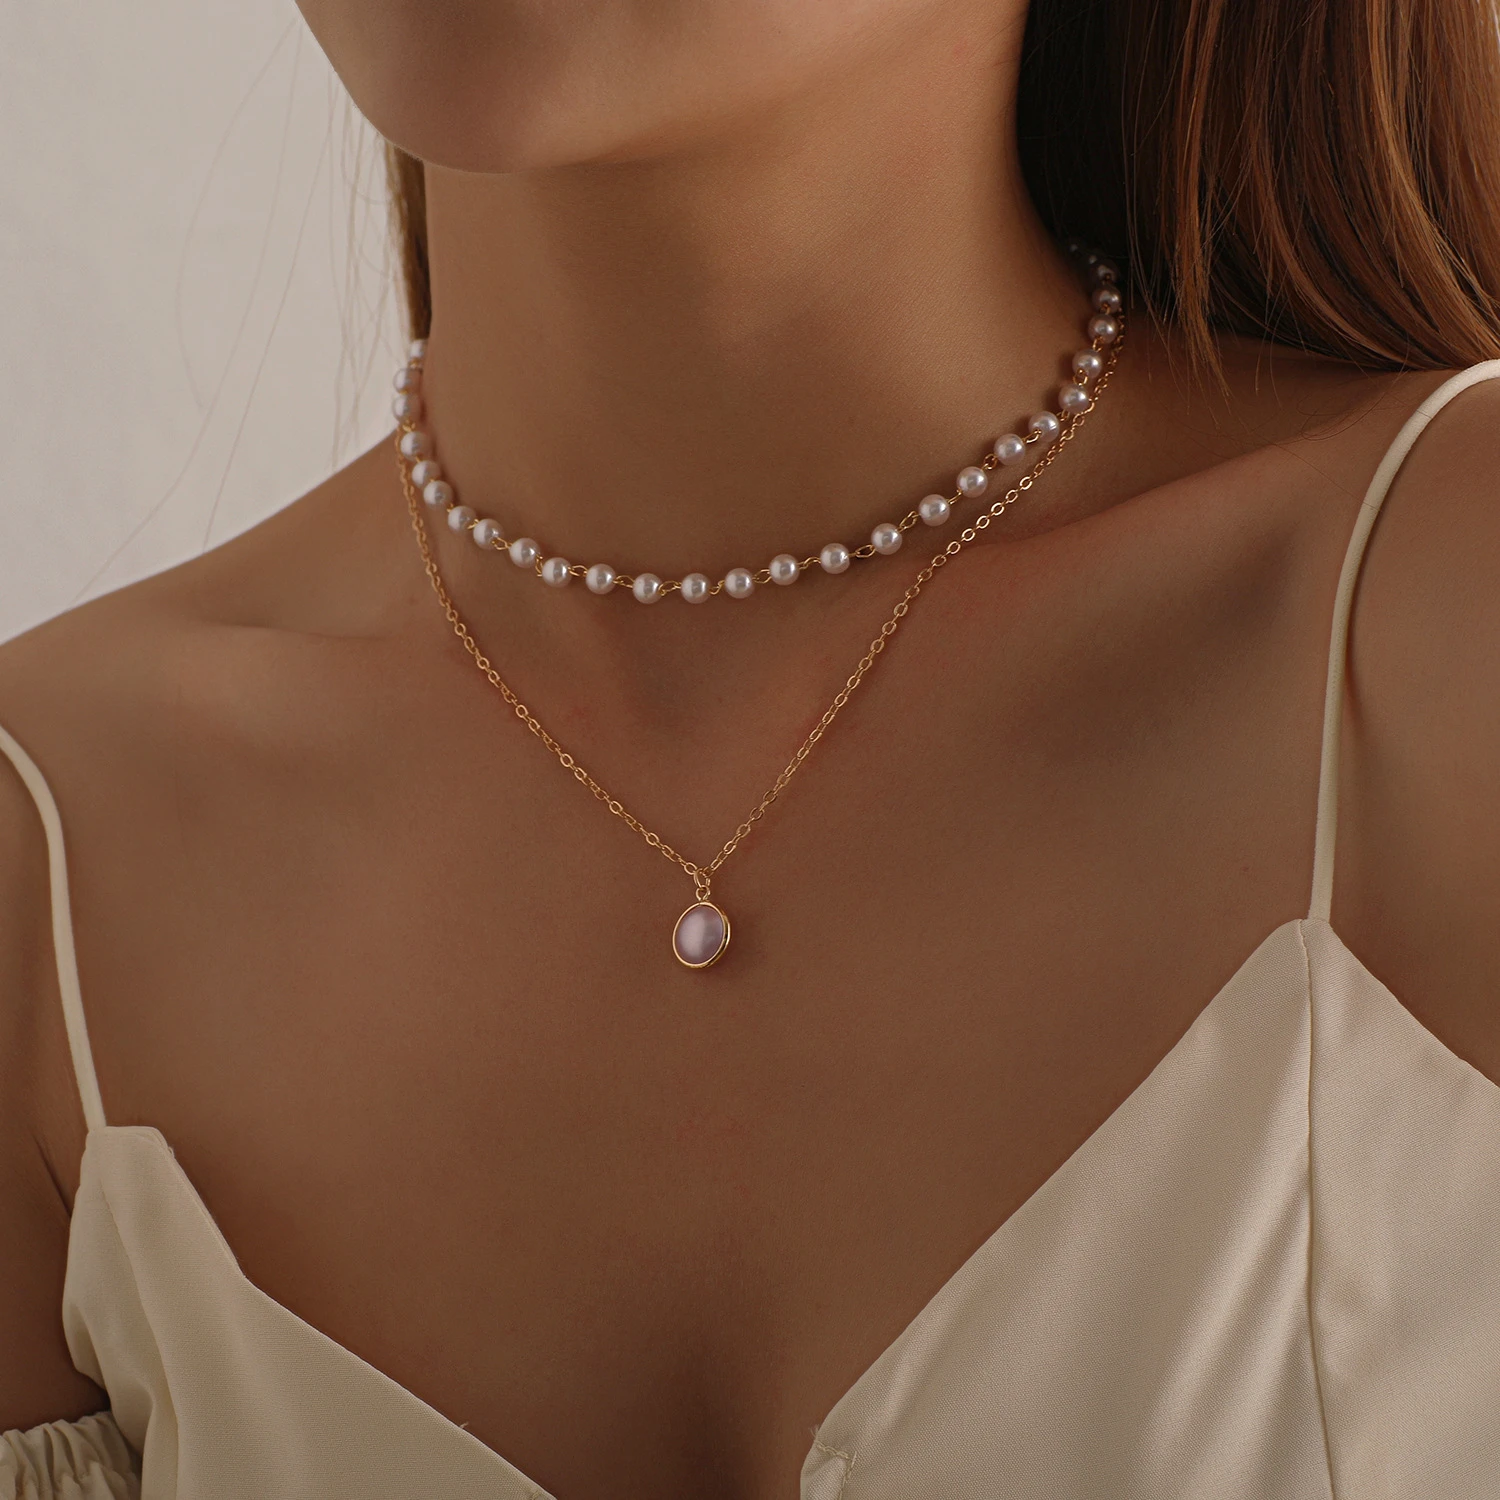 2021 New Fashion Kpop Pearl Choker Necklace Cute Double Layer Chain Pendant For Women Jewelry Girl Gift Gold Necklace Collier